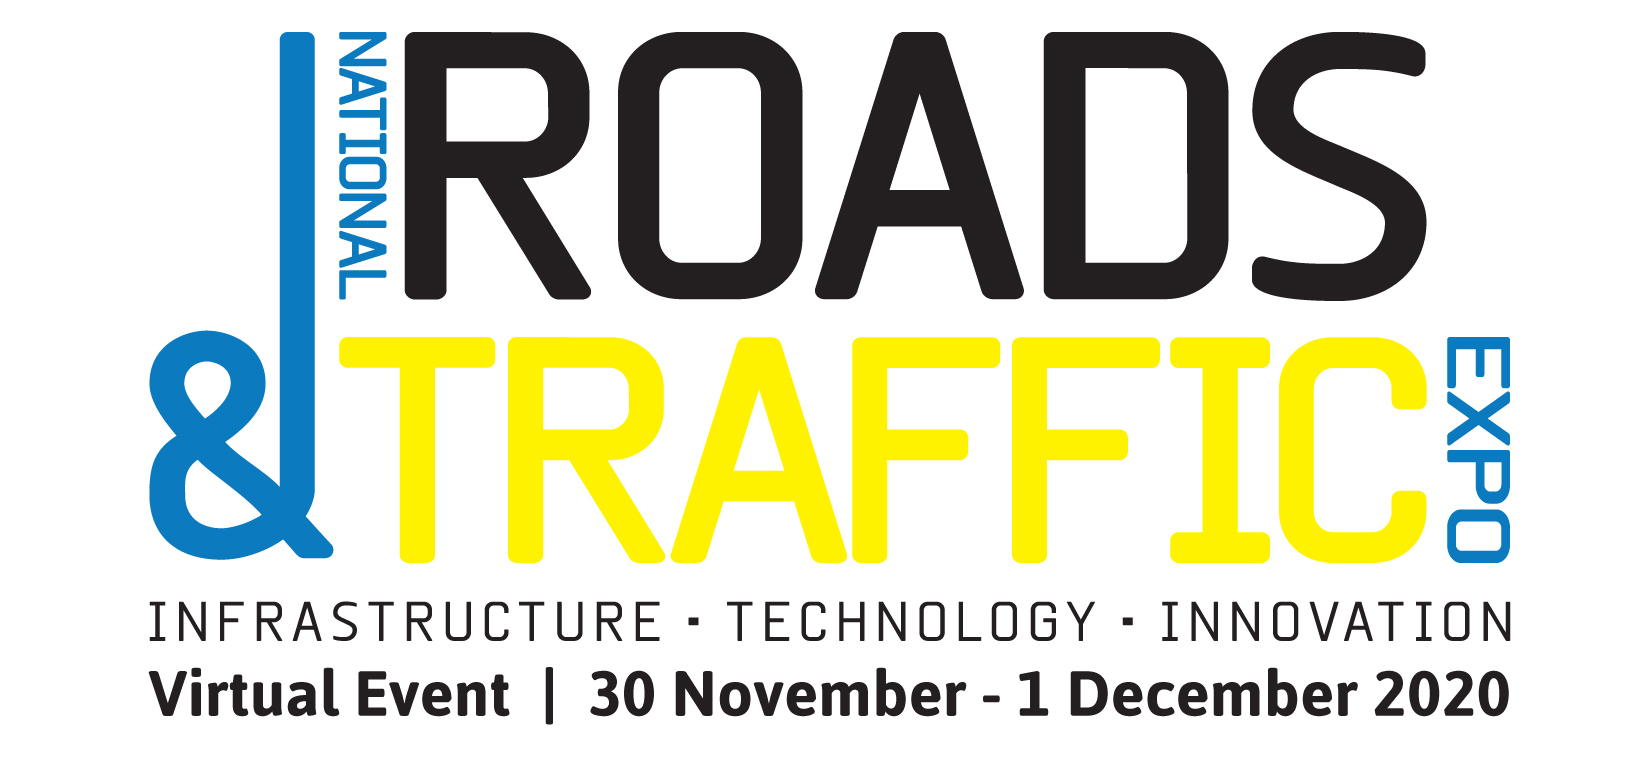 The National Roads and Traffic Expo, Australia